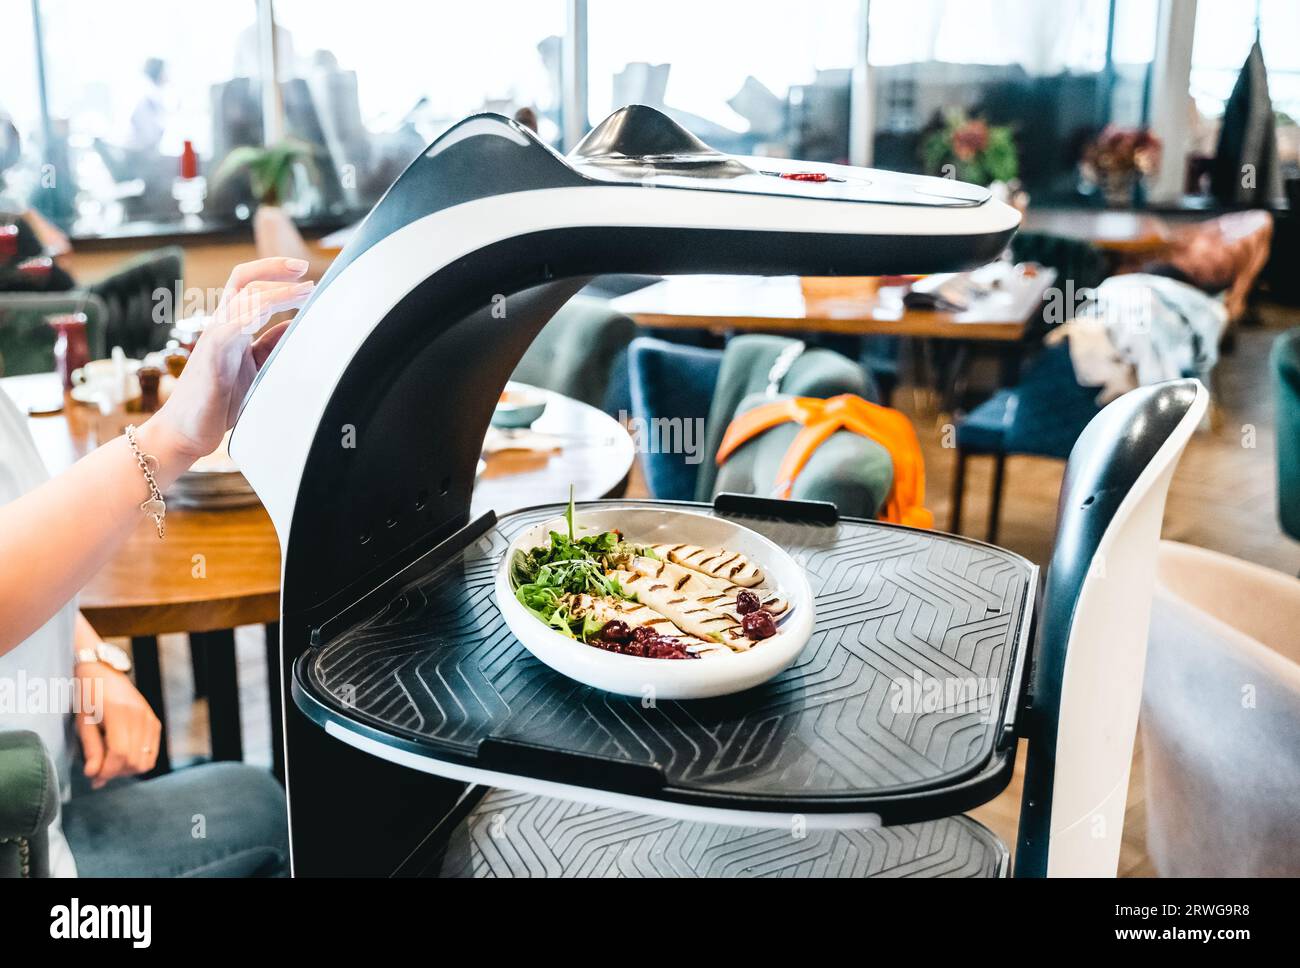 Robot waiter serve food at modern restaurant table.Offering innovation futuristic high-tech automated dining experience.Bringing,delivery automation o Stock Photo